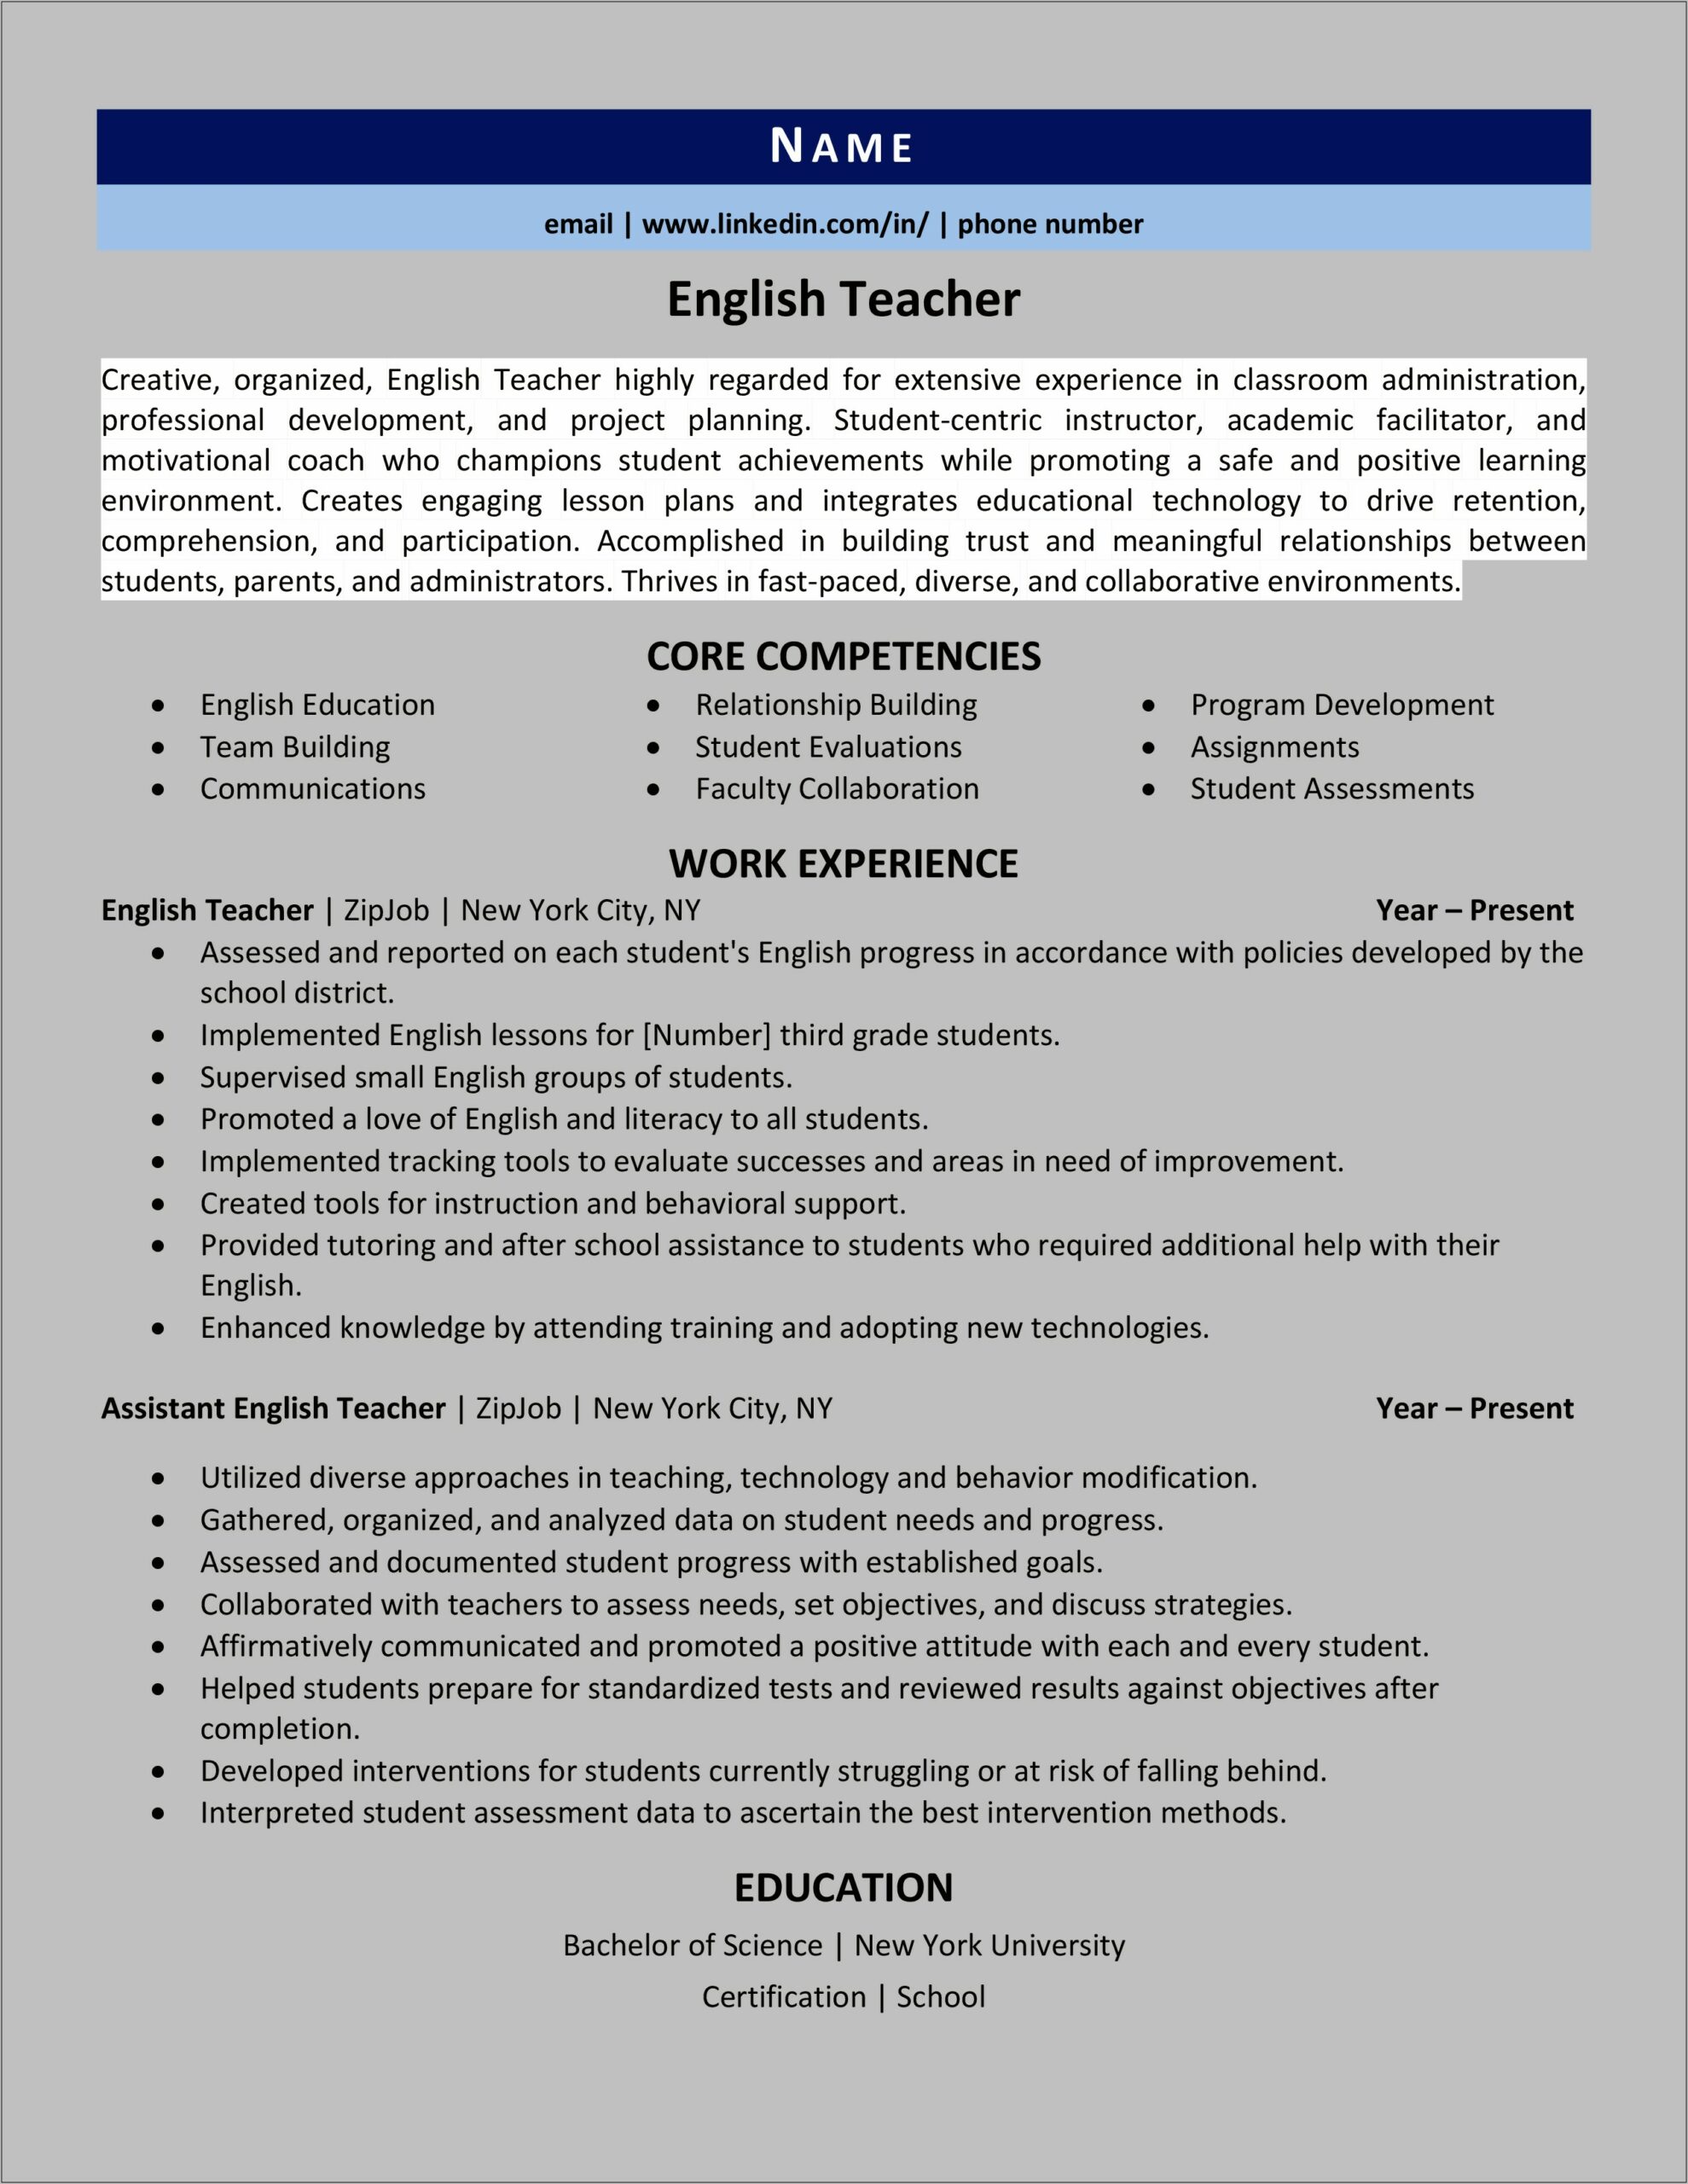 Resume Writing Lesson Plan For High School